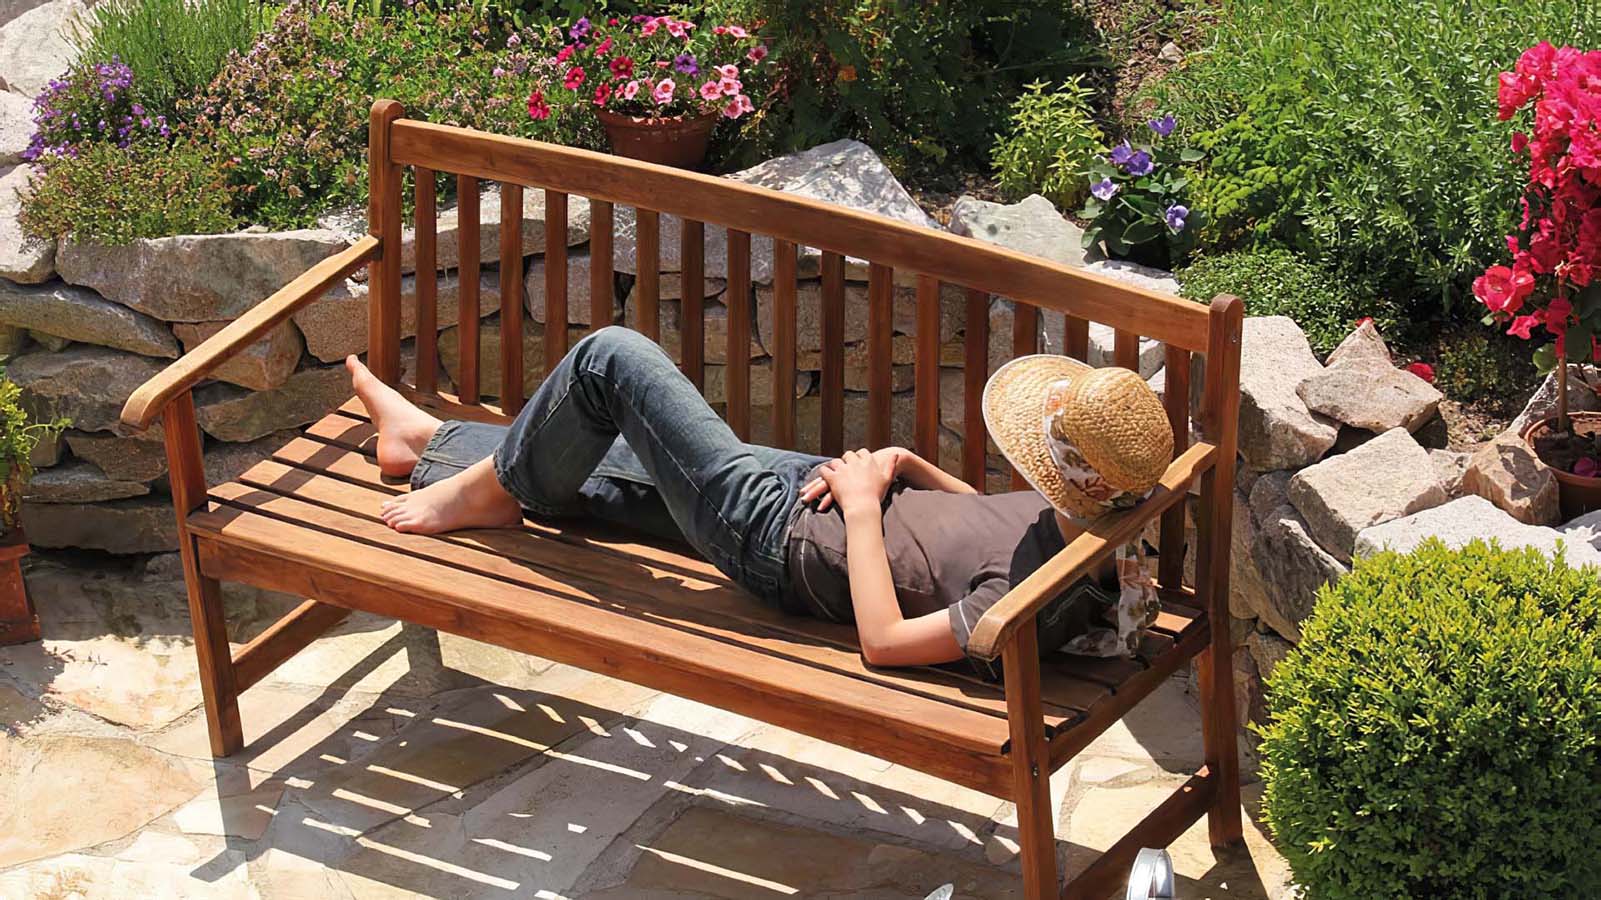 For many, the start of spring or summer marks the time to spruce up outdoor wood furniture that’s in desperate need of a little TLC...